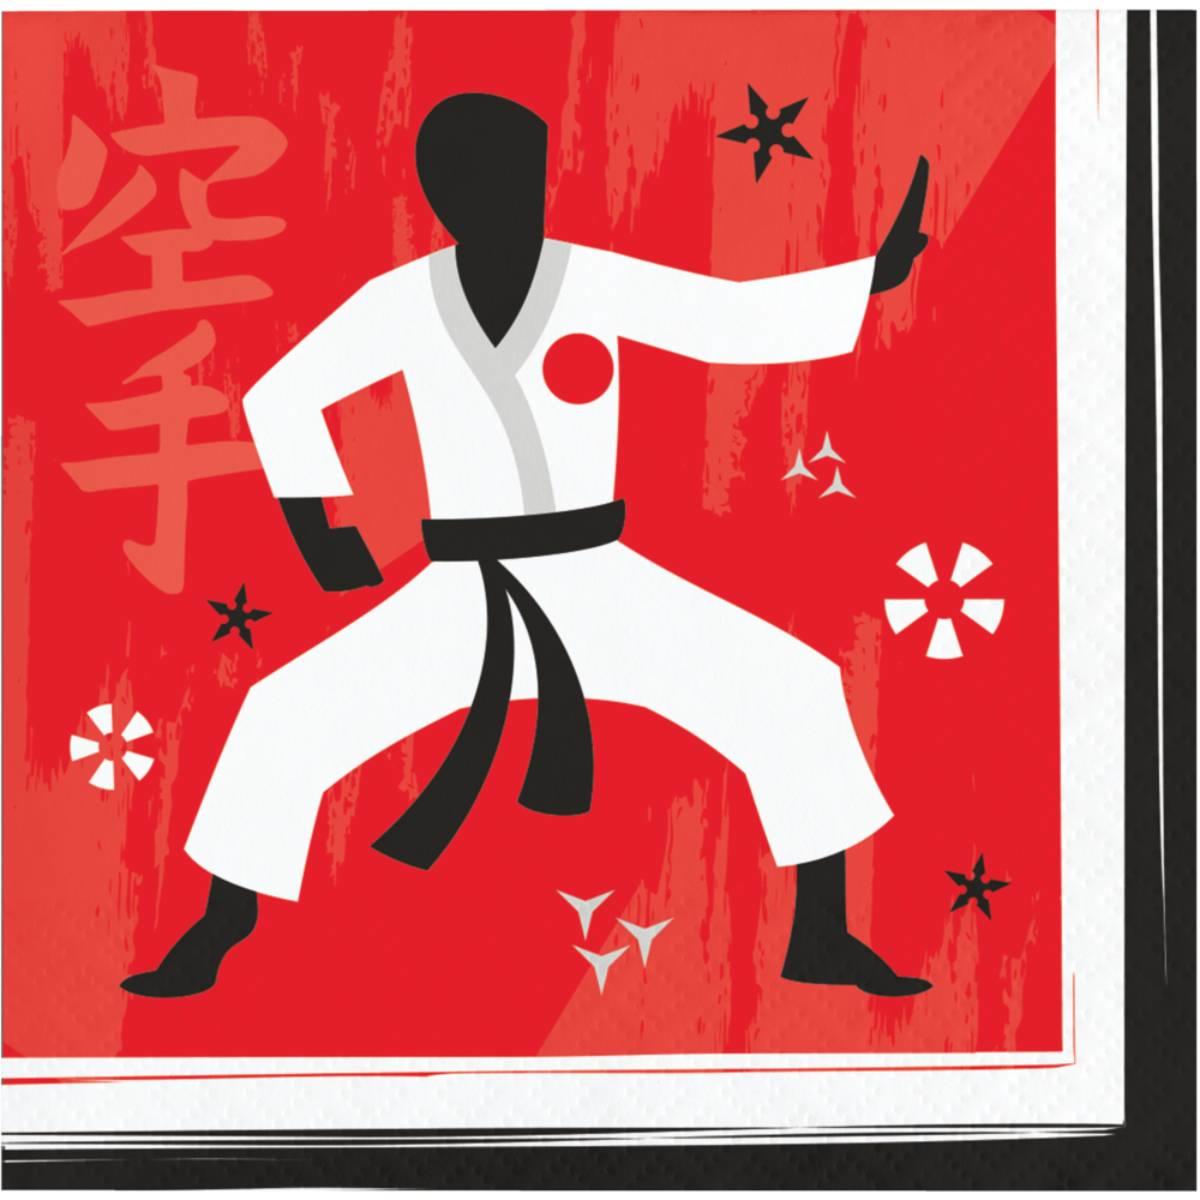 Karate Themed Beverage Napkins pk16 by Creative Converting 346245 available here at Karnival Costumes online party shop